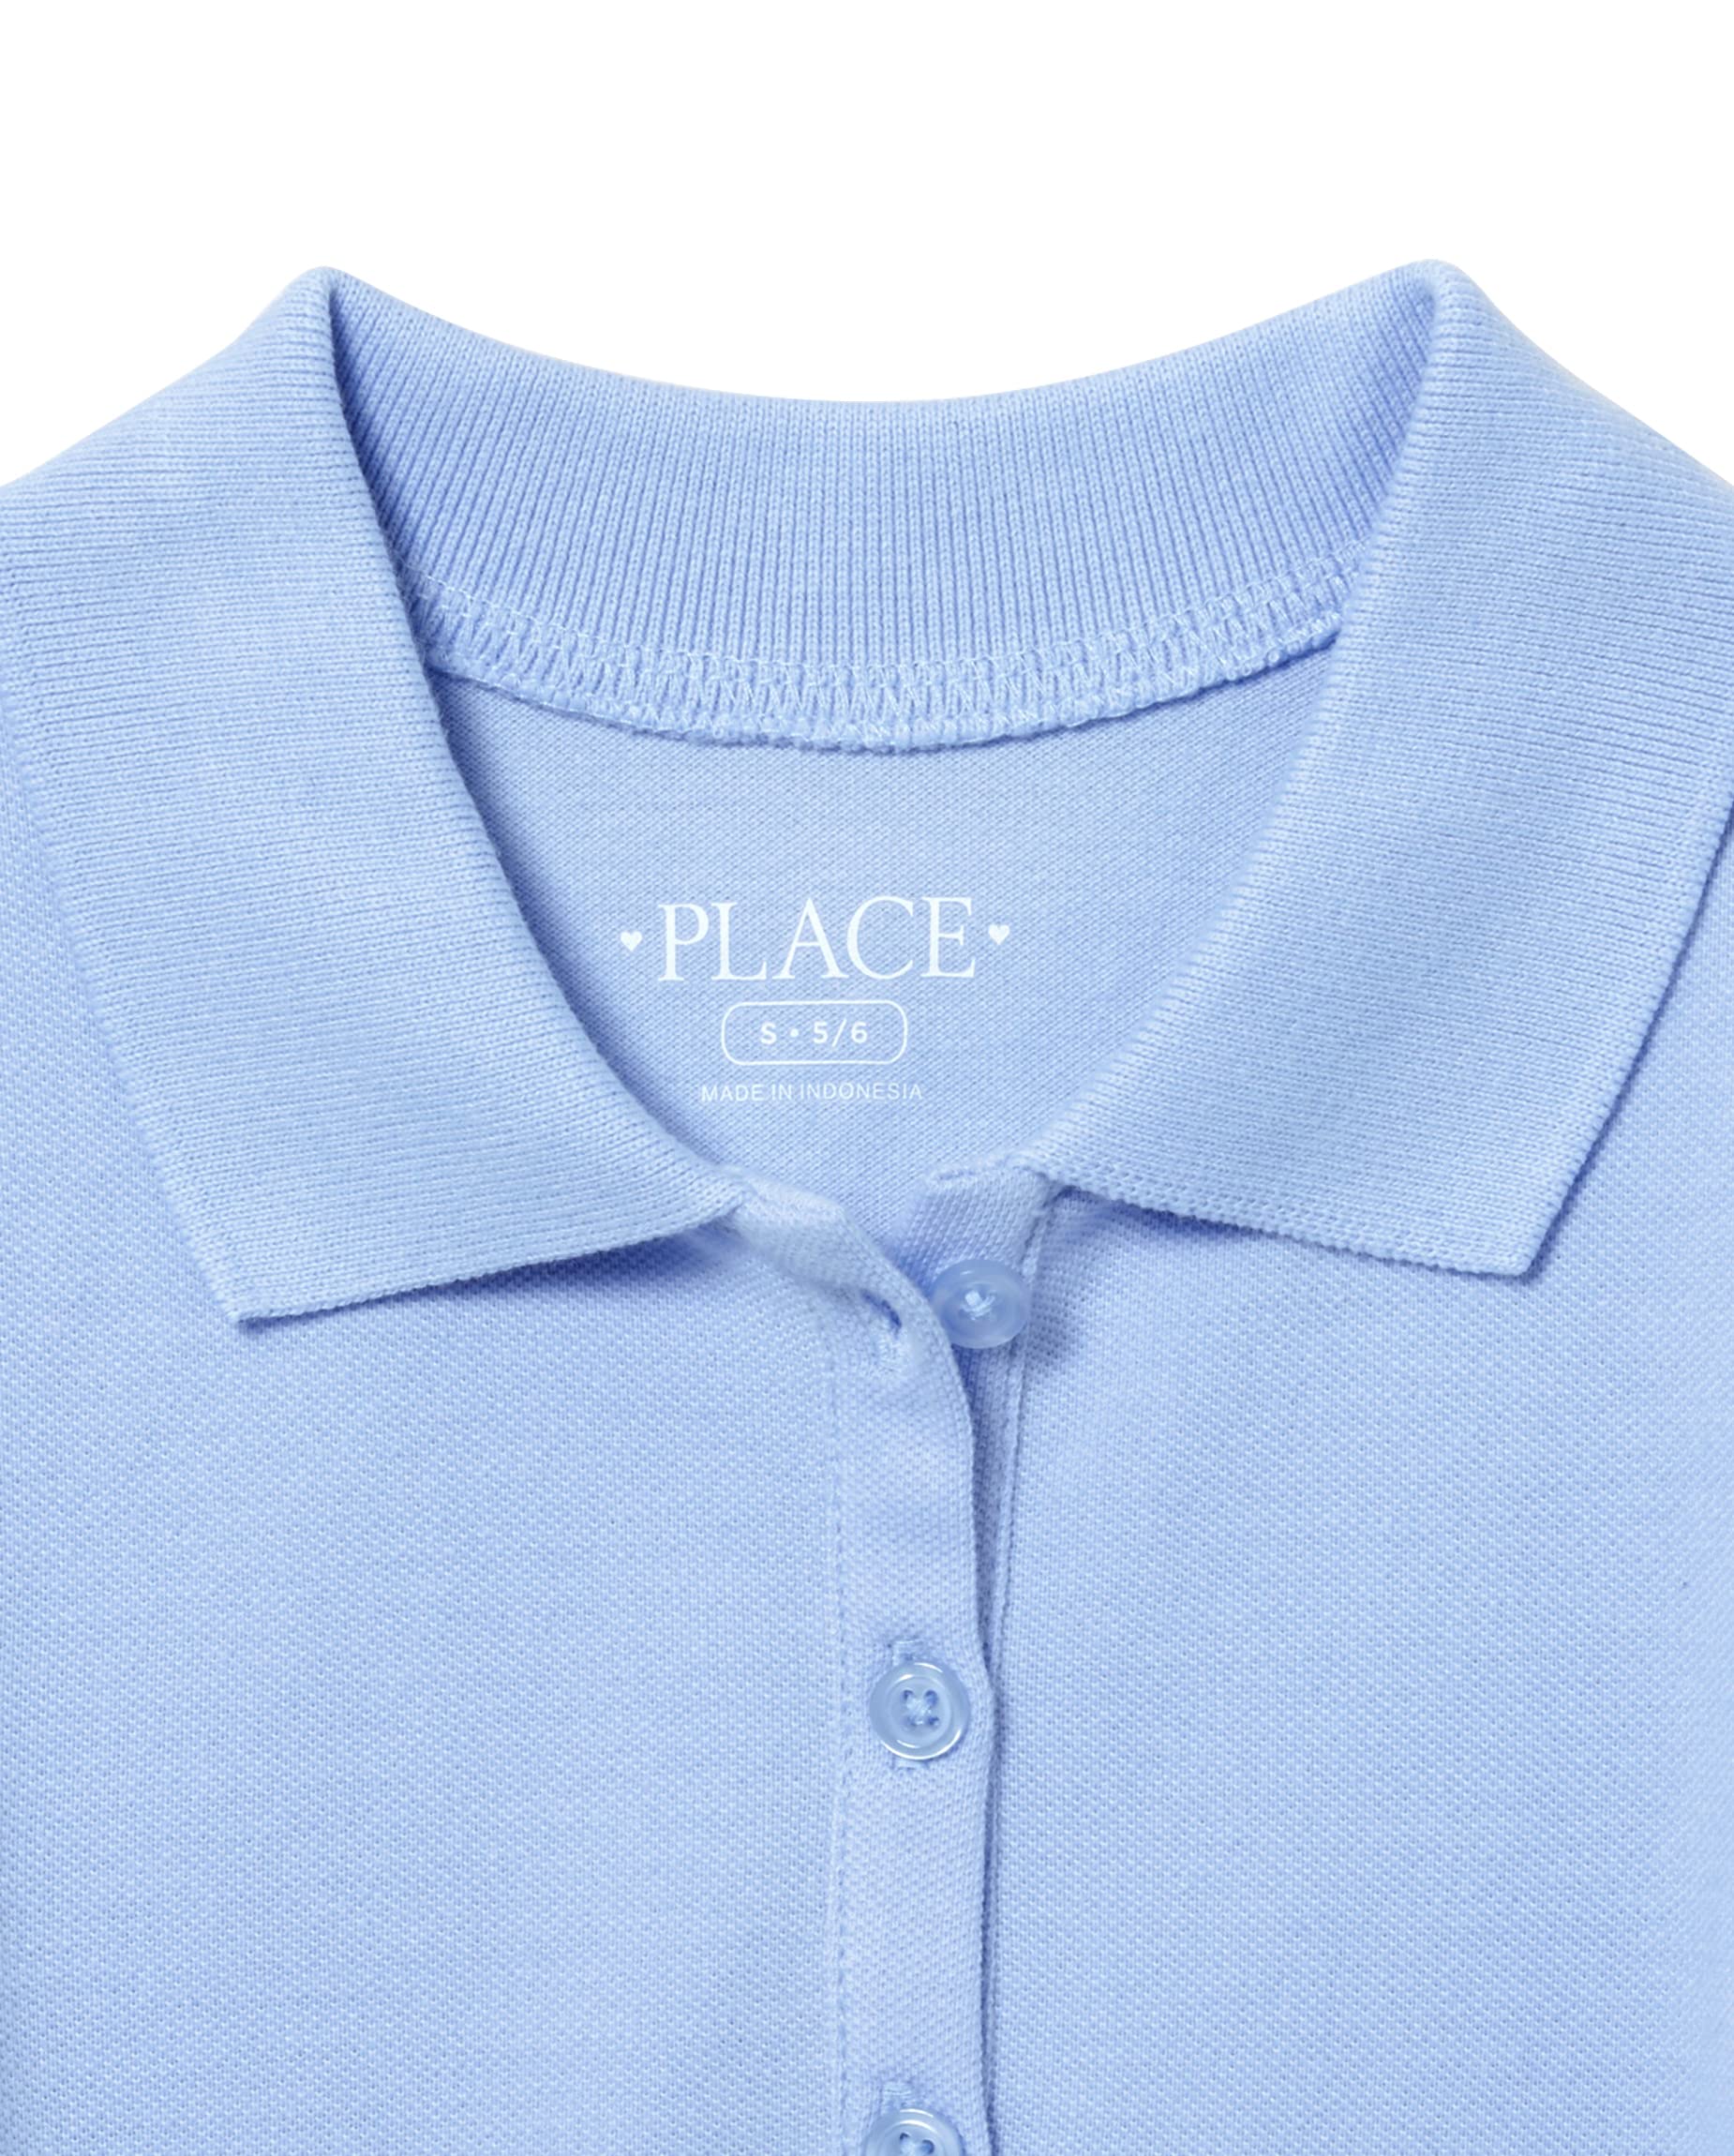 The Children's Place Girls' Pique Polo Dress